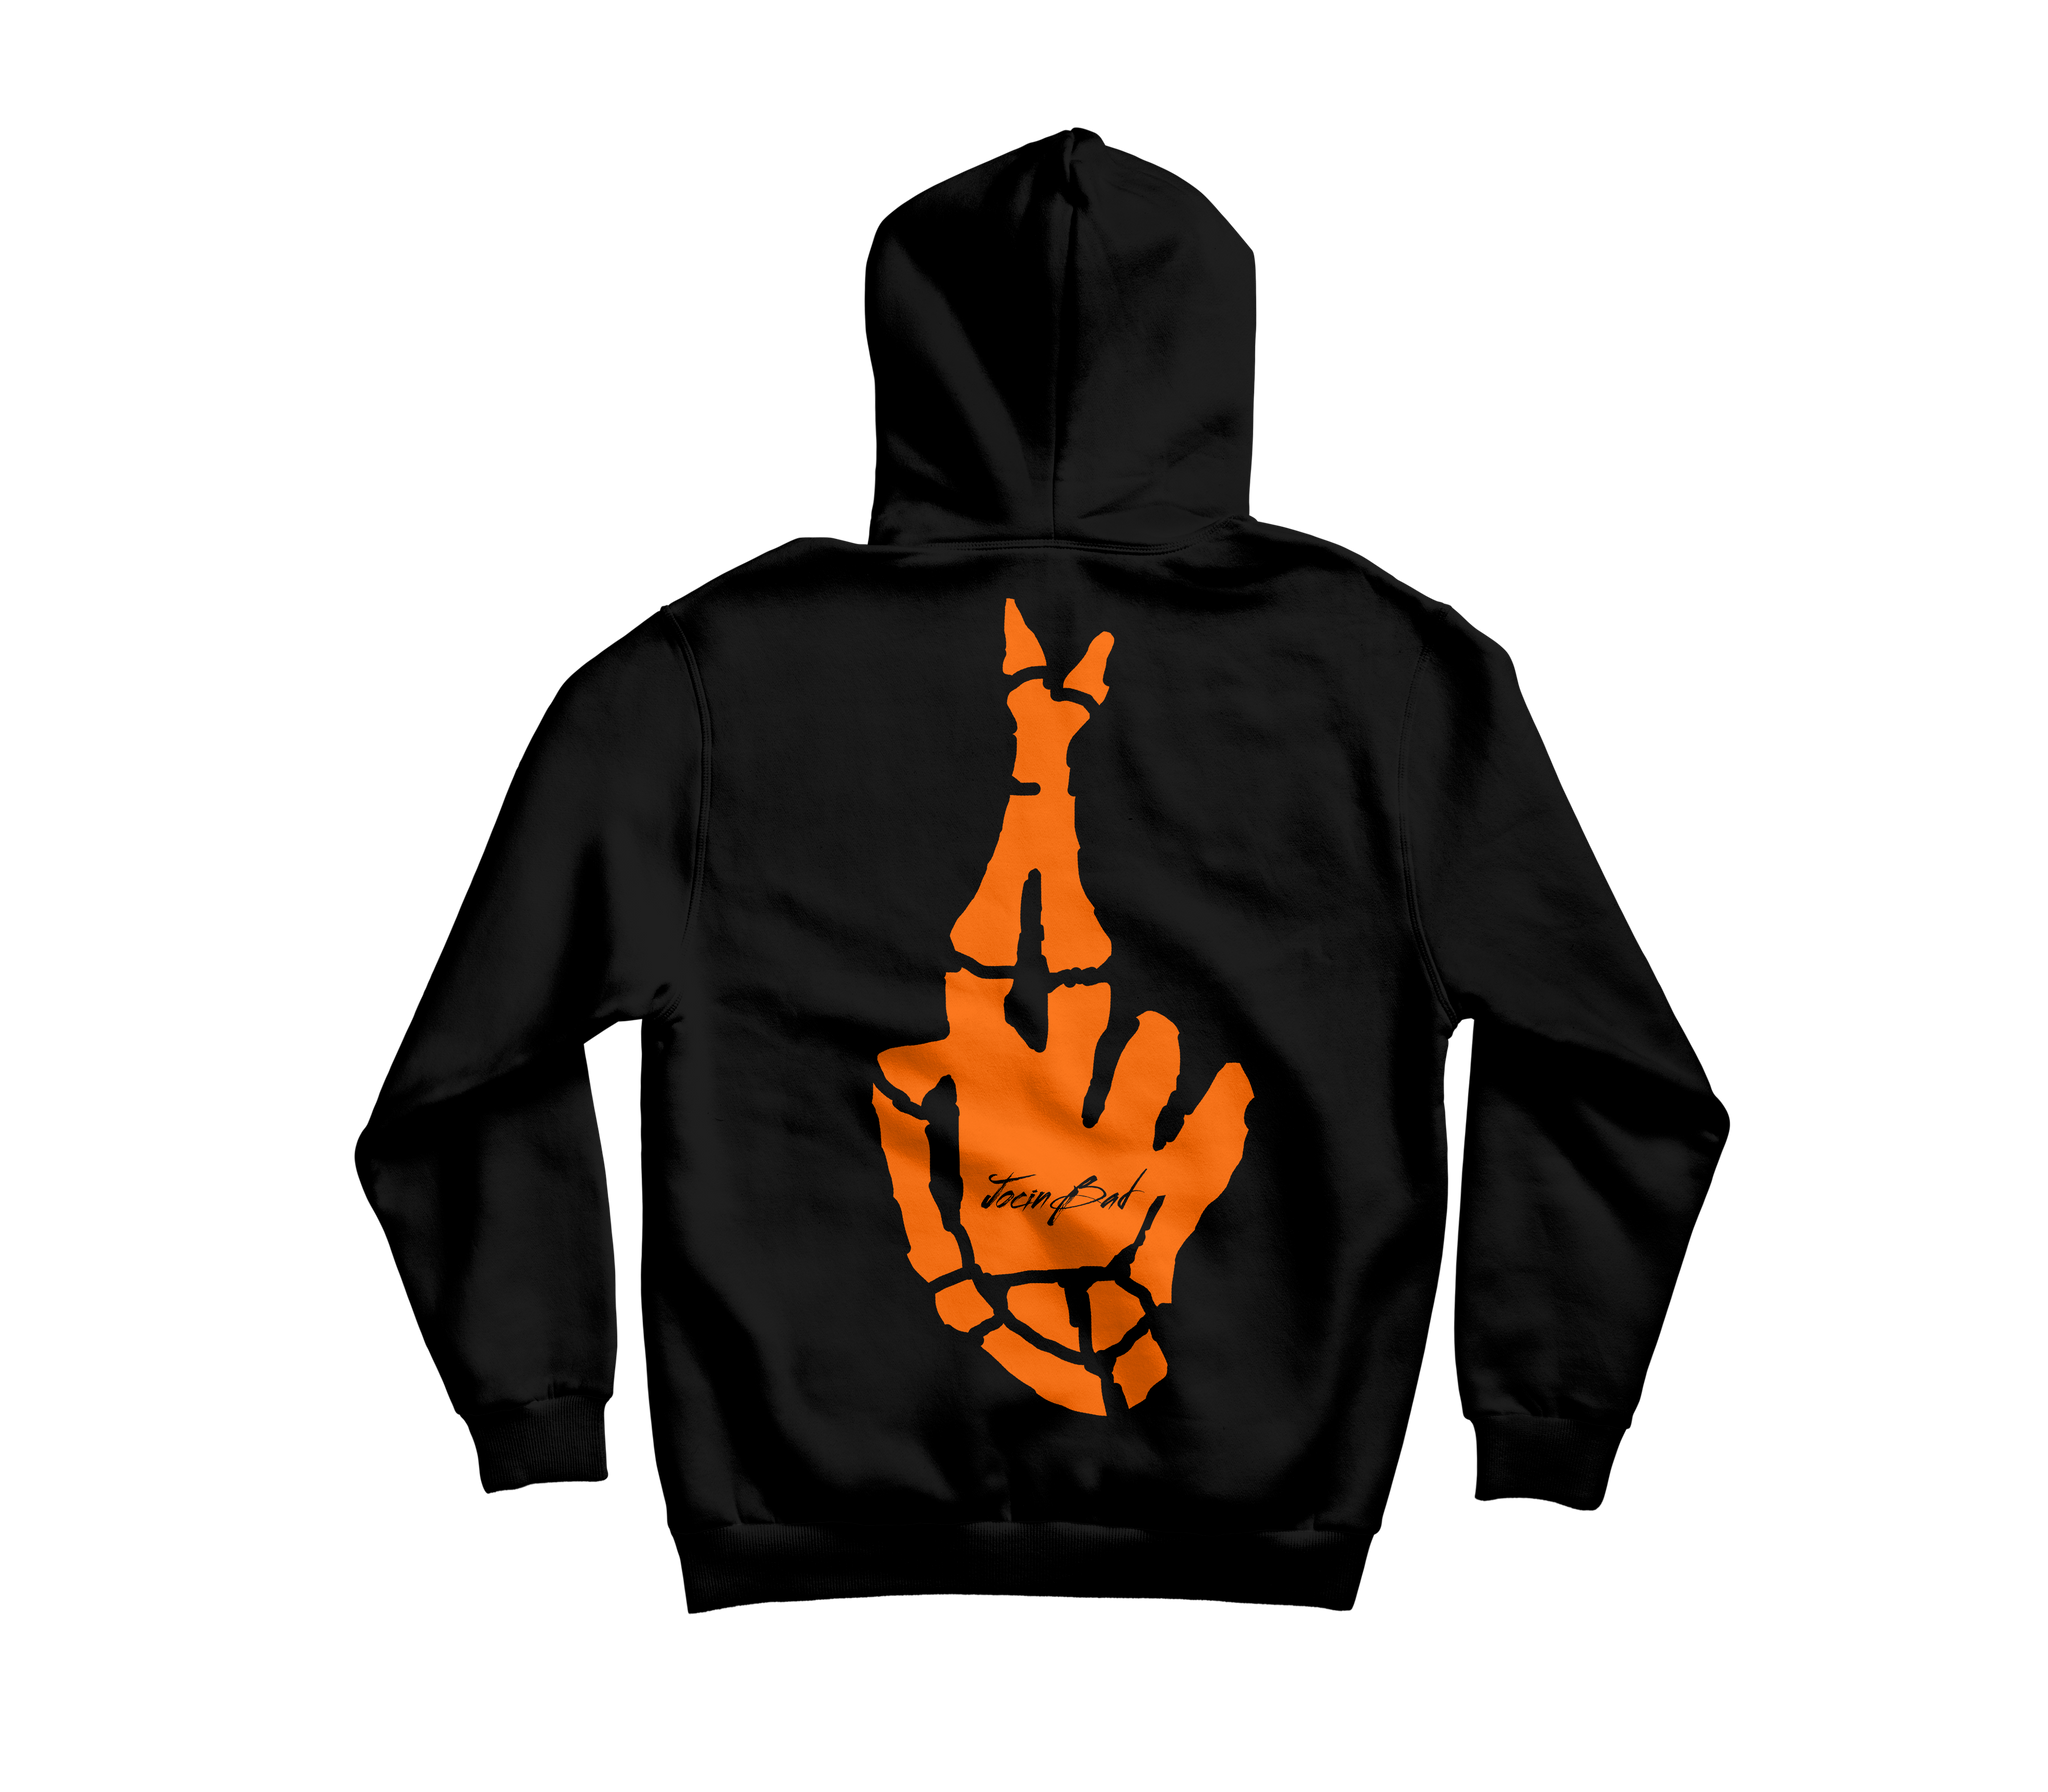 POTNAS Hoodie - Black (NOT AVAILABLE YET)